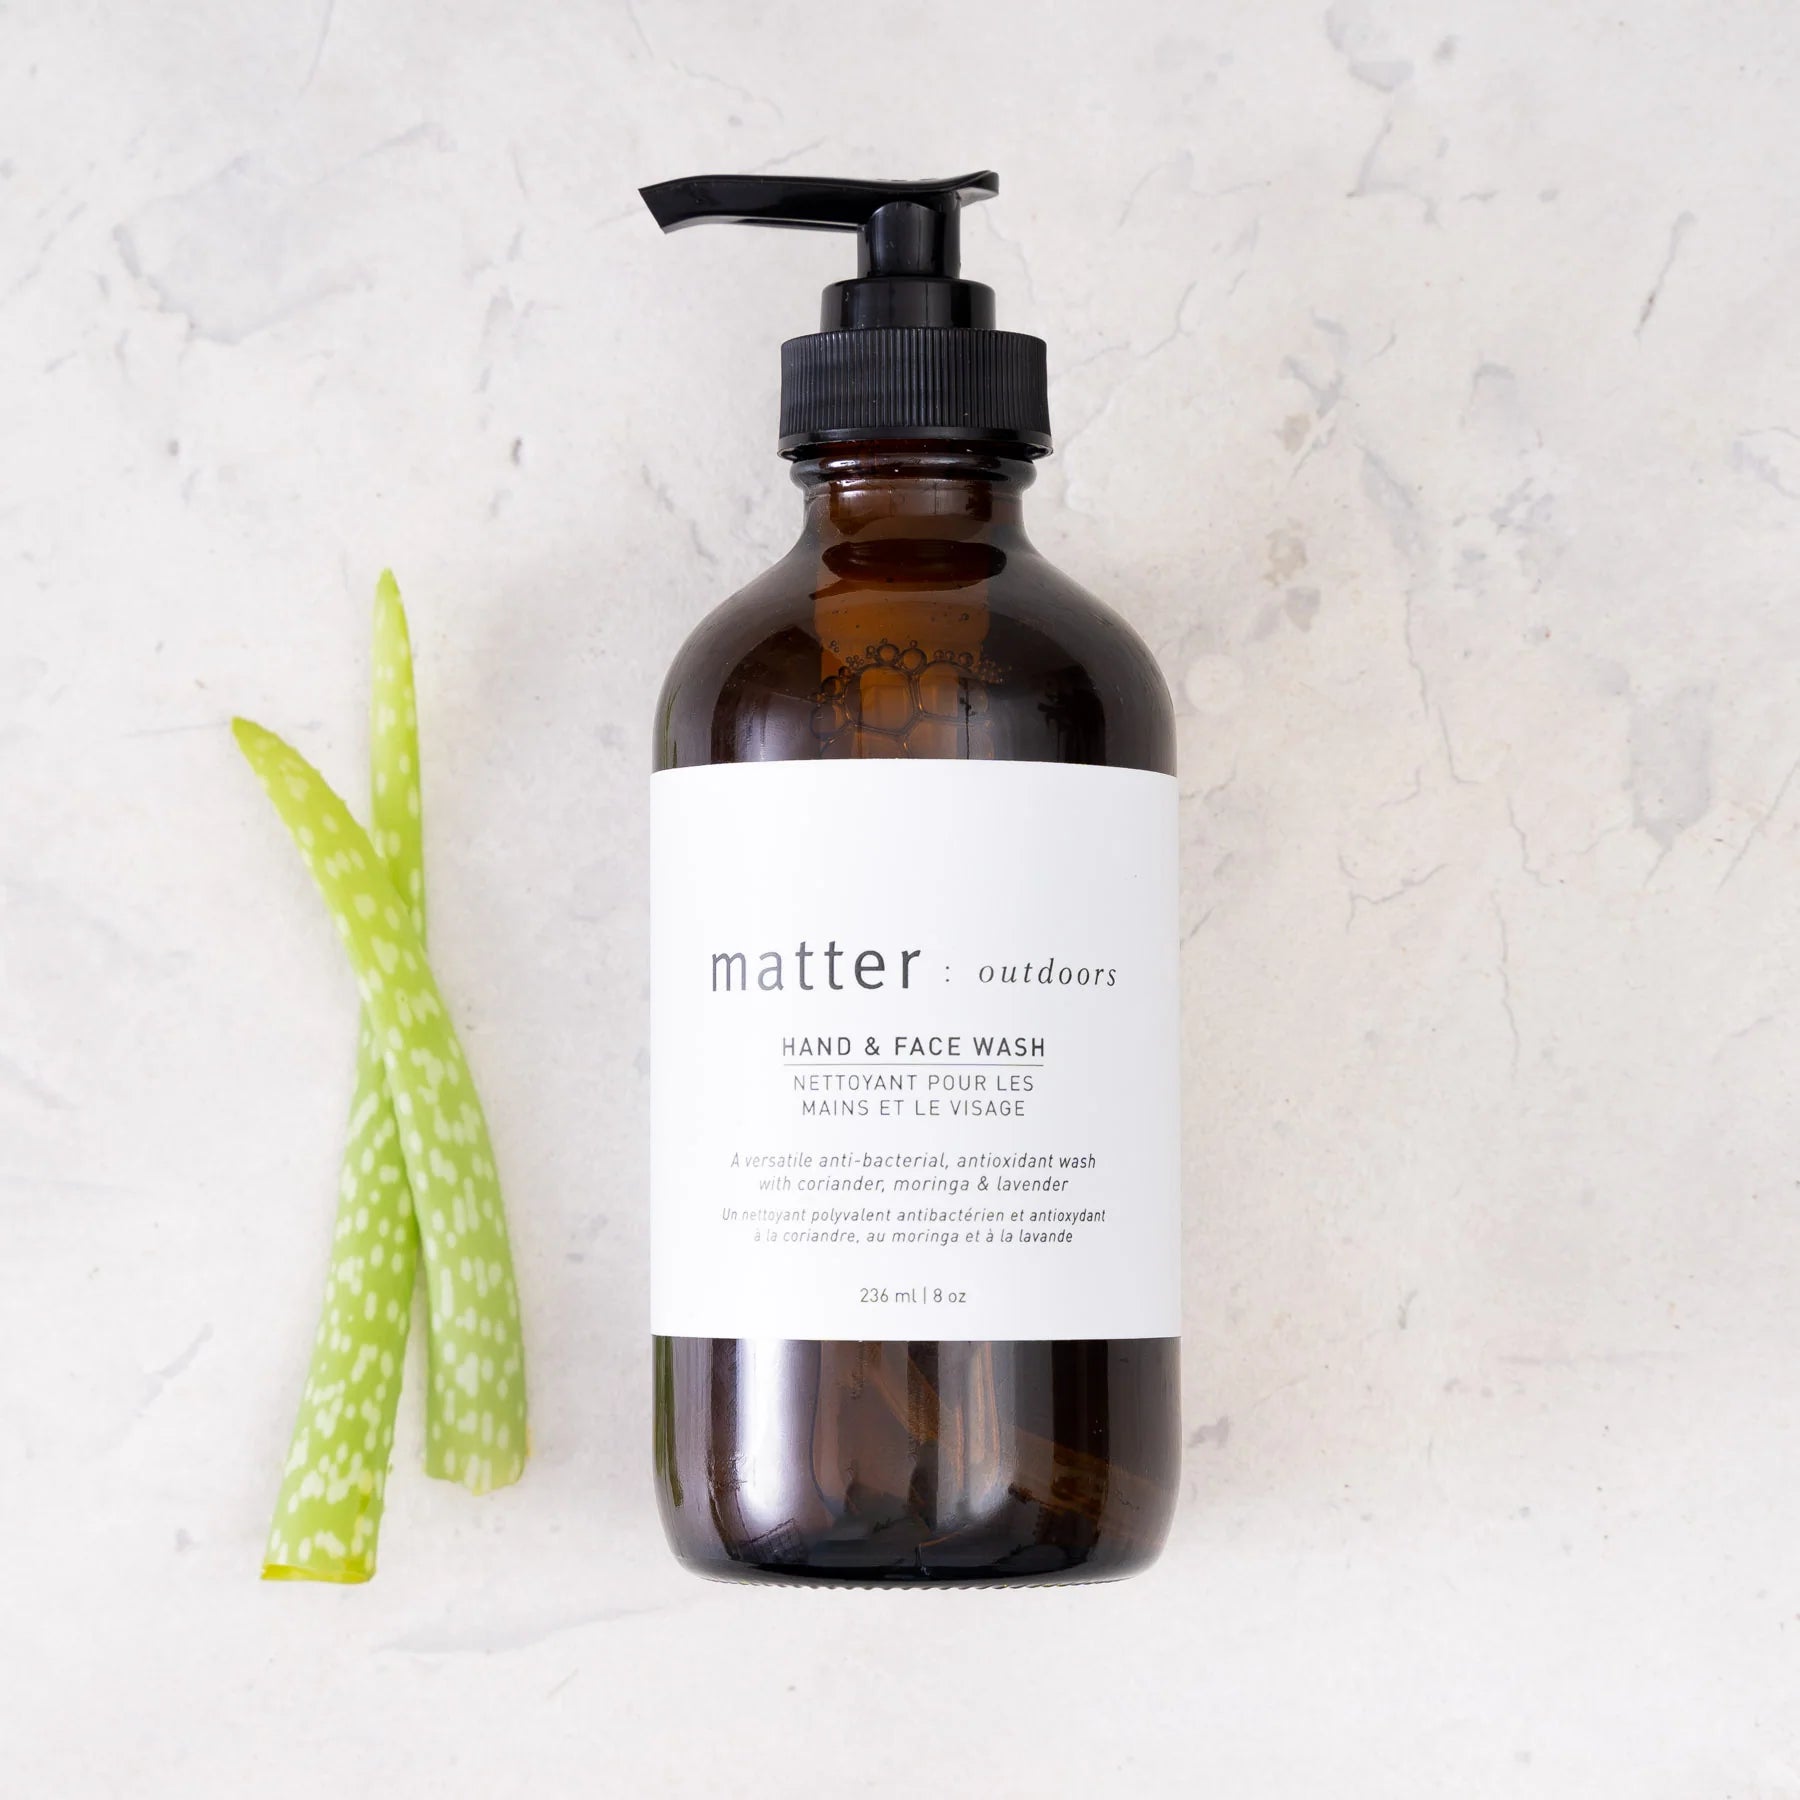 Matter Company - Outdoors Hand and Face Wash